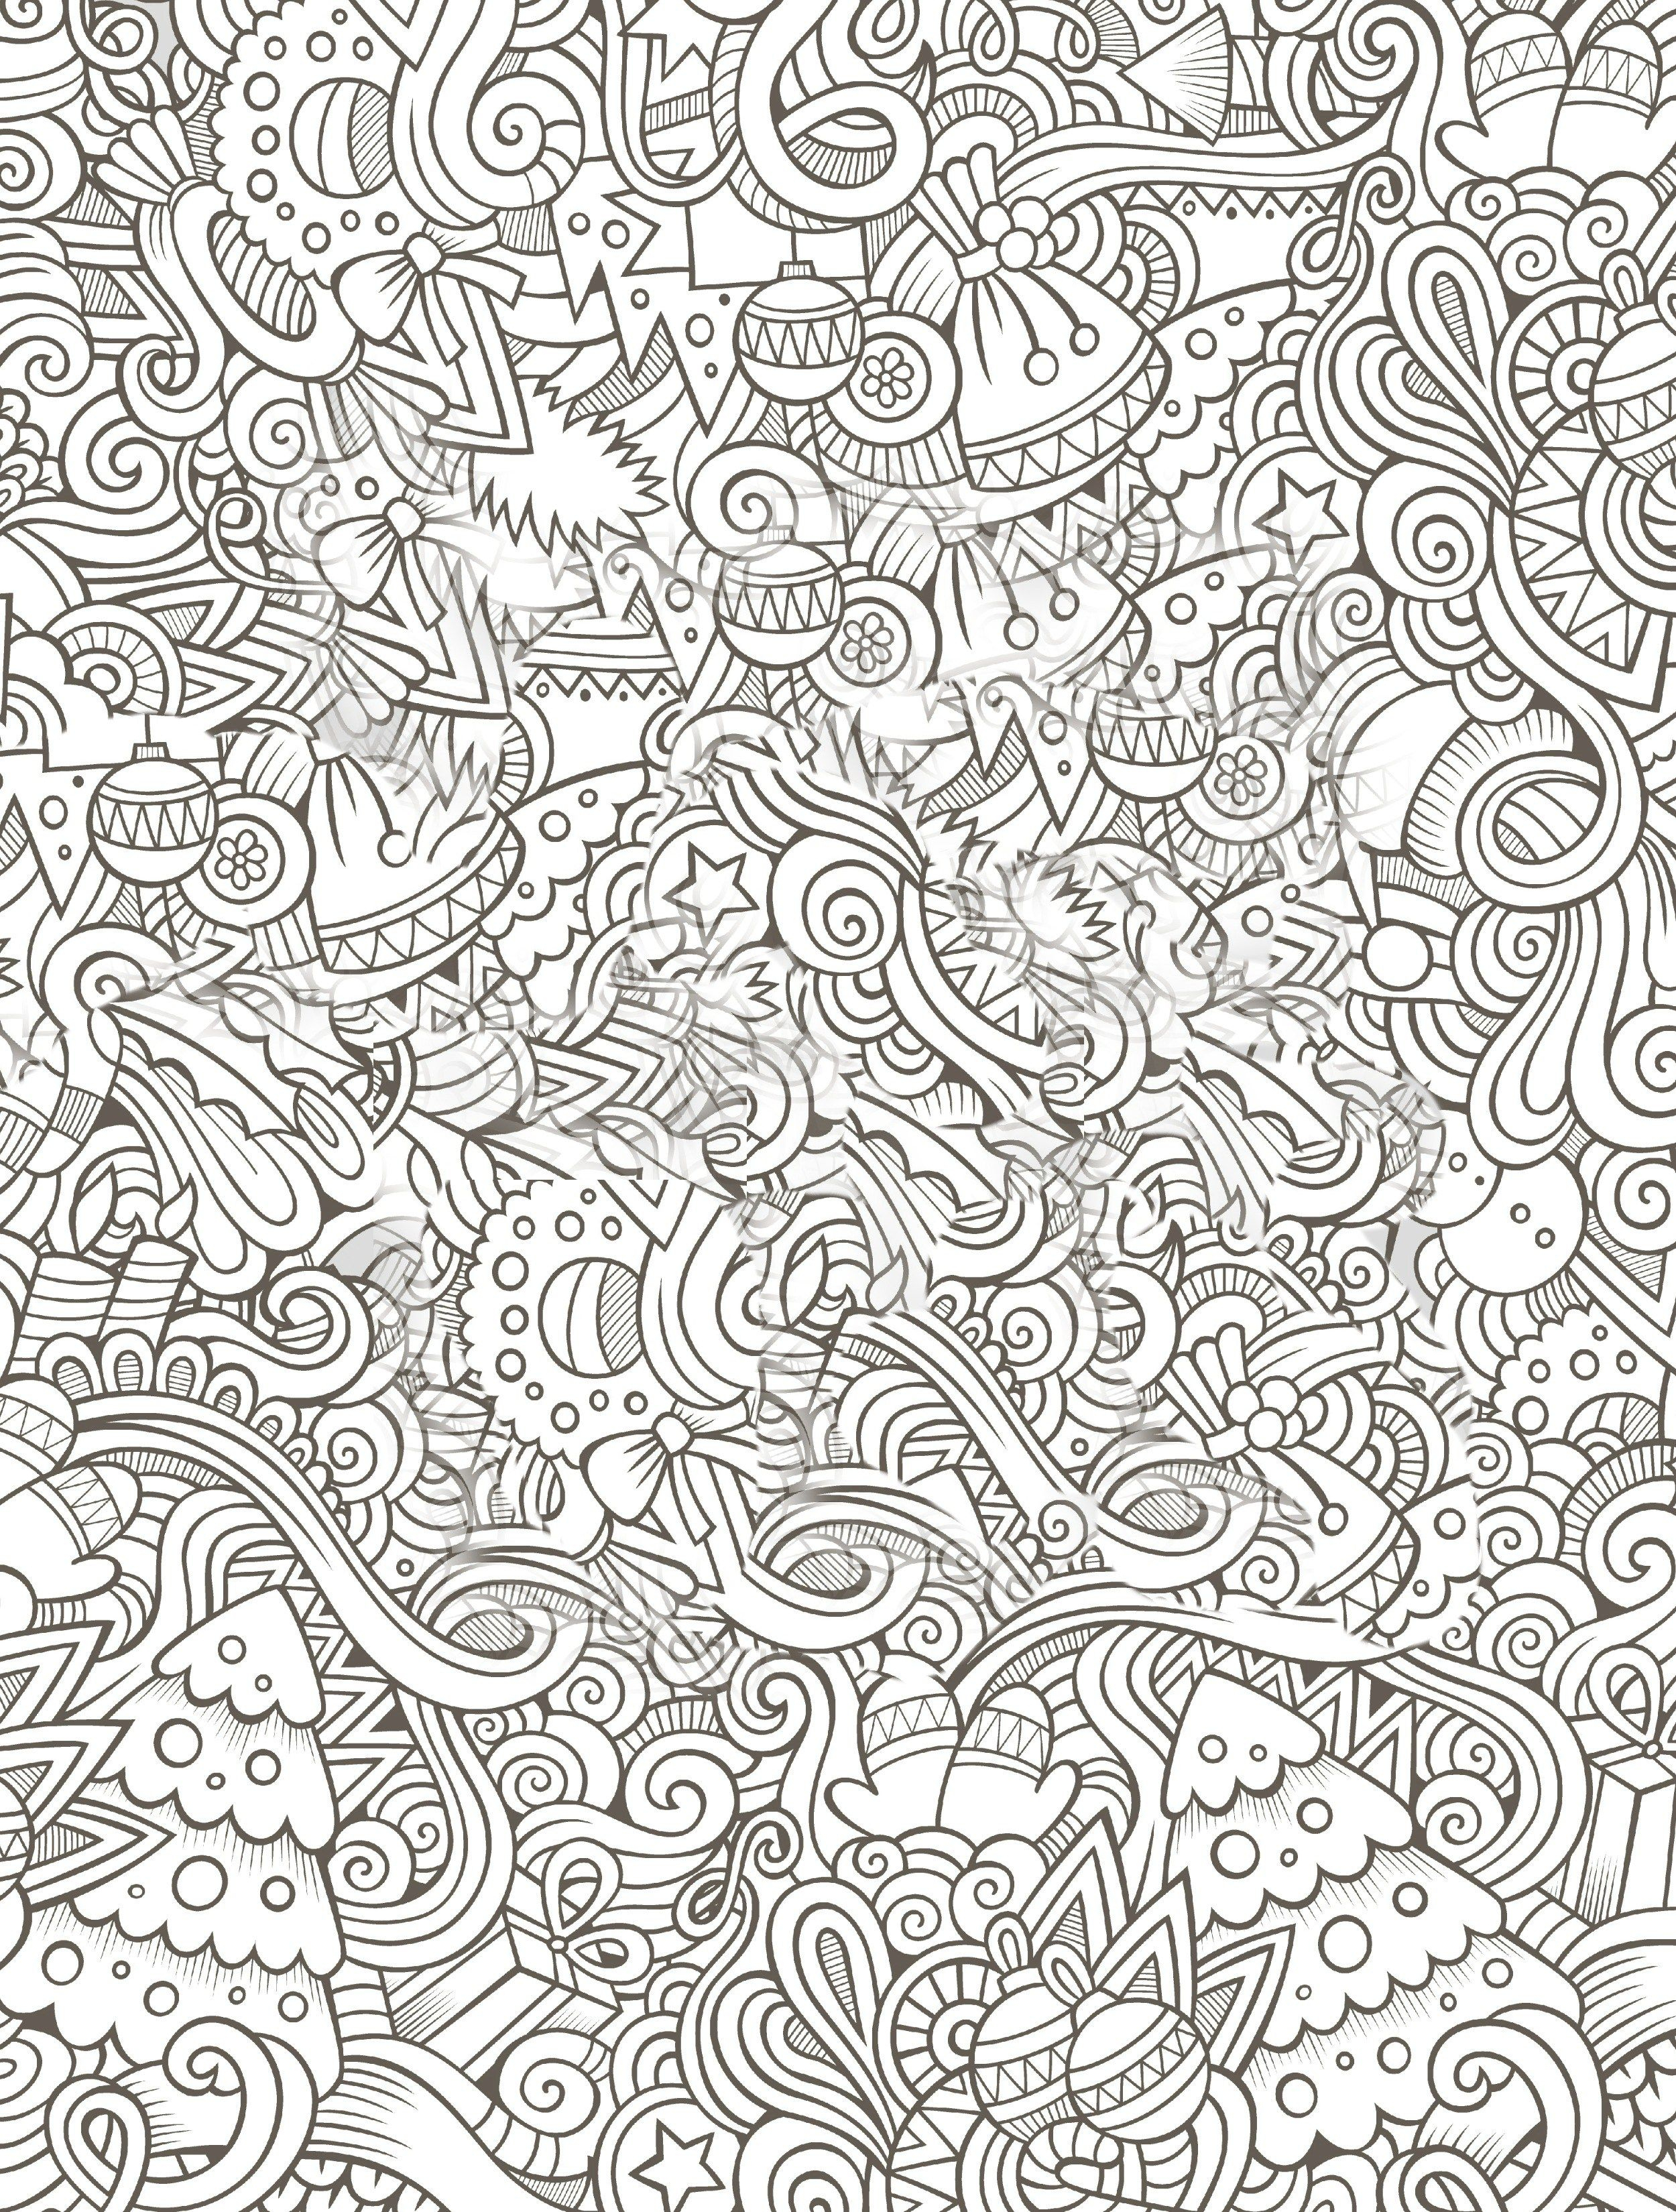 10 Free Printable Holiday Adult Coloring Pages | Free Coloring Pages - Free Printable Holiday Coloring Pages